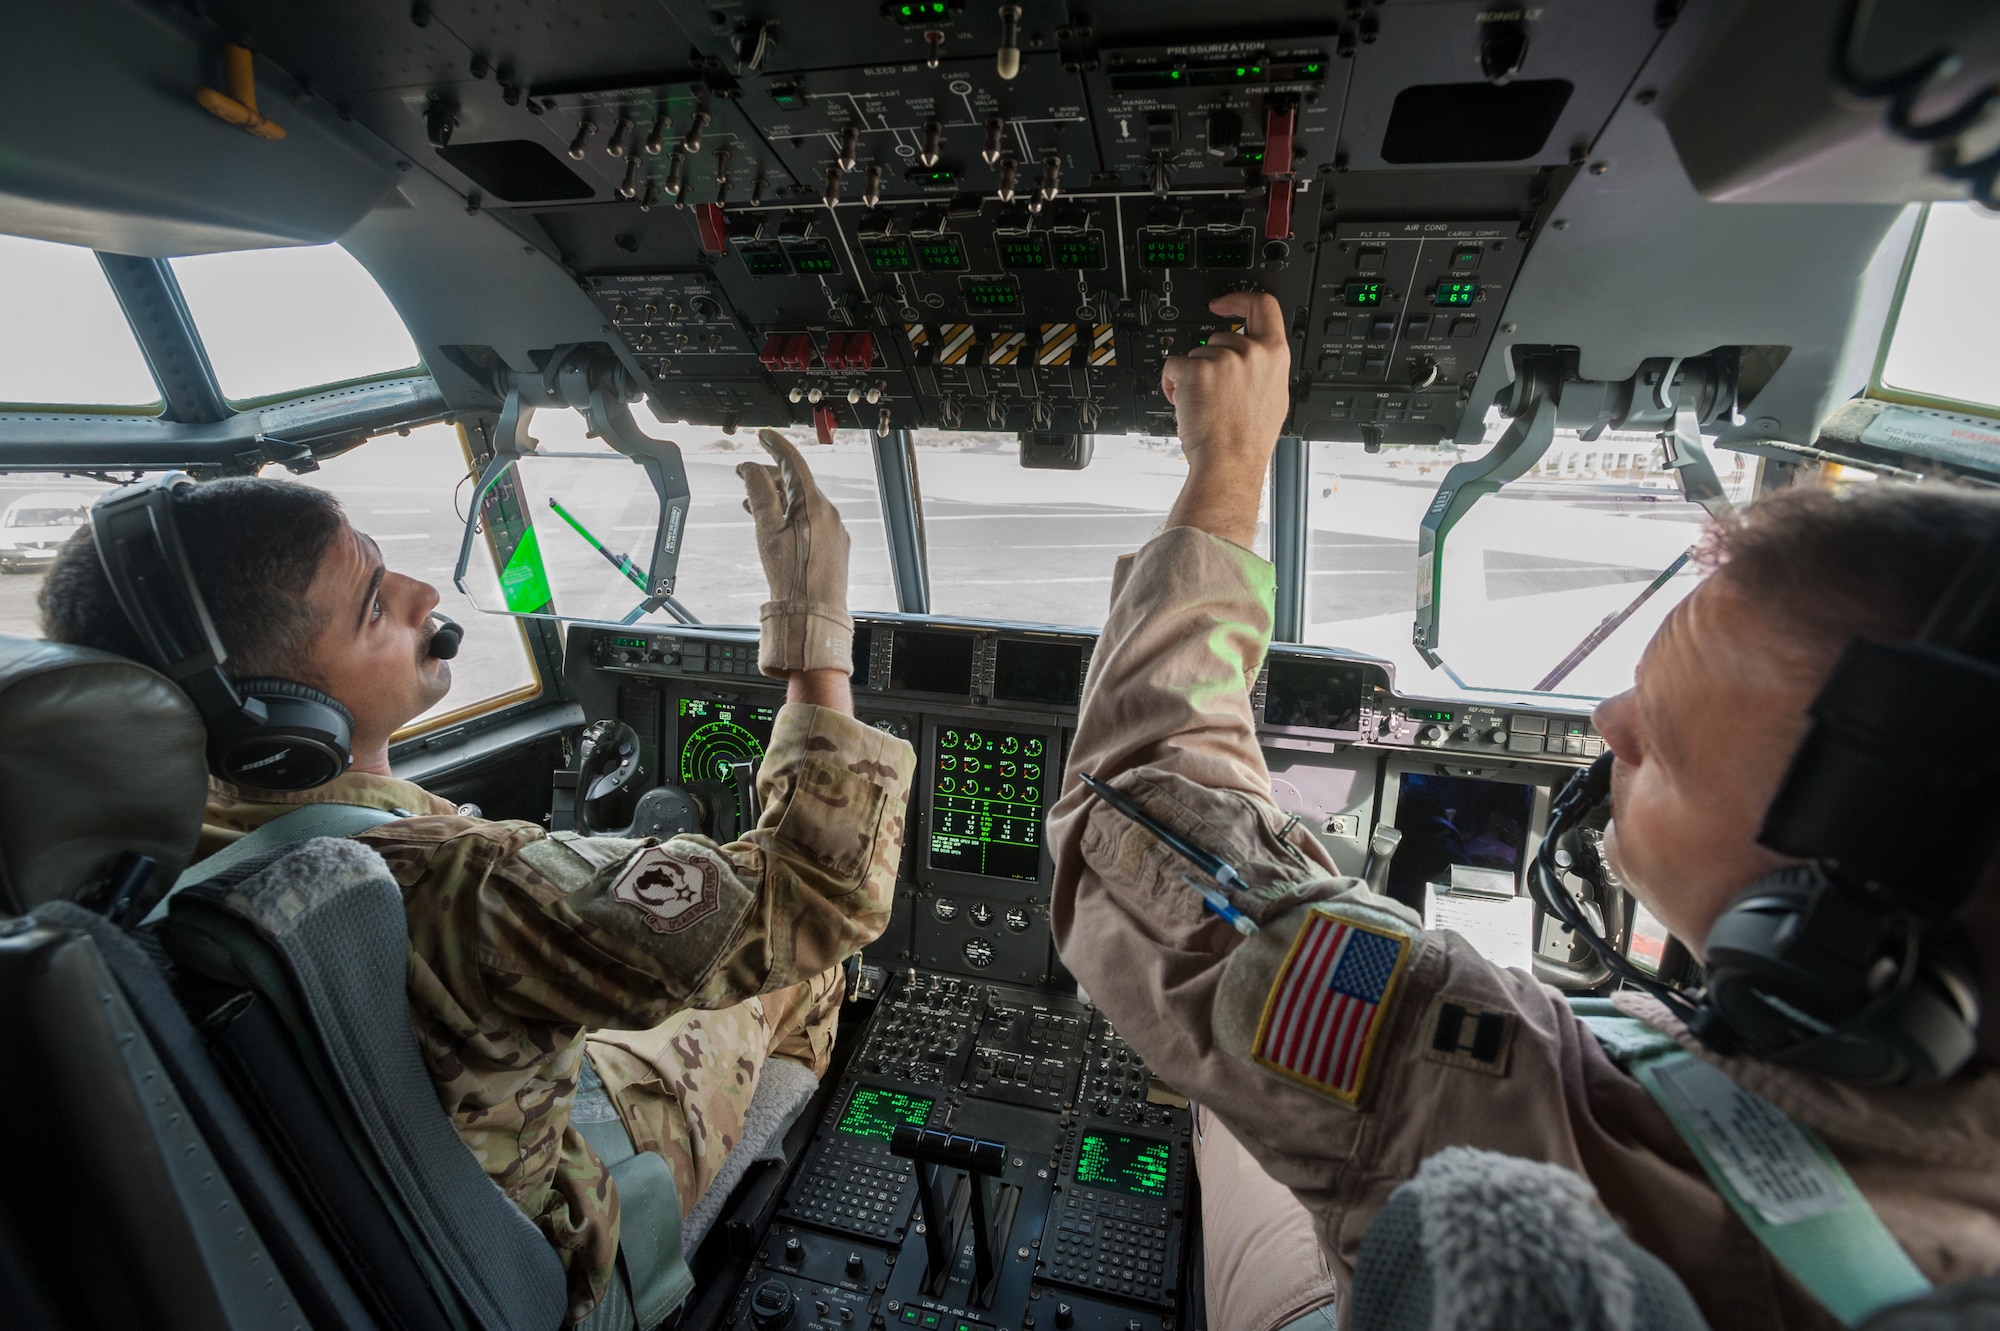 U.S. Air Force Capts. Vincent Levraea (left) and Jason Steinlicht, both pilots from the 317th Airlift Group at Dyess Air Force Base, Texas, conduct pre-flight checklists at Léopold Sédar Senghor International Airport in Dakar, Senegal, Nov. 4, 2014. The pilots are preparing to fly a sortie into Monrovia, Liberia, to deliver more than 8 tons of humanitarian aid and military supplies in support of Operation United Assistance, the U.S. Agency for International Development-led, whole-of-government effort to contain the Ebola virus outbreak in West Africa. (U.S. Air National Guard photo by Maj. Dale Greer)